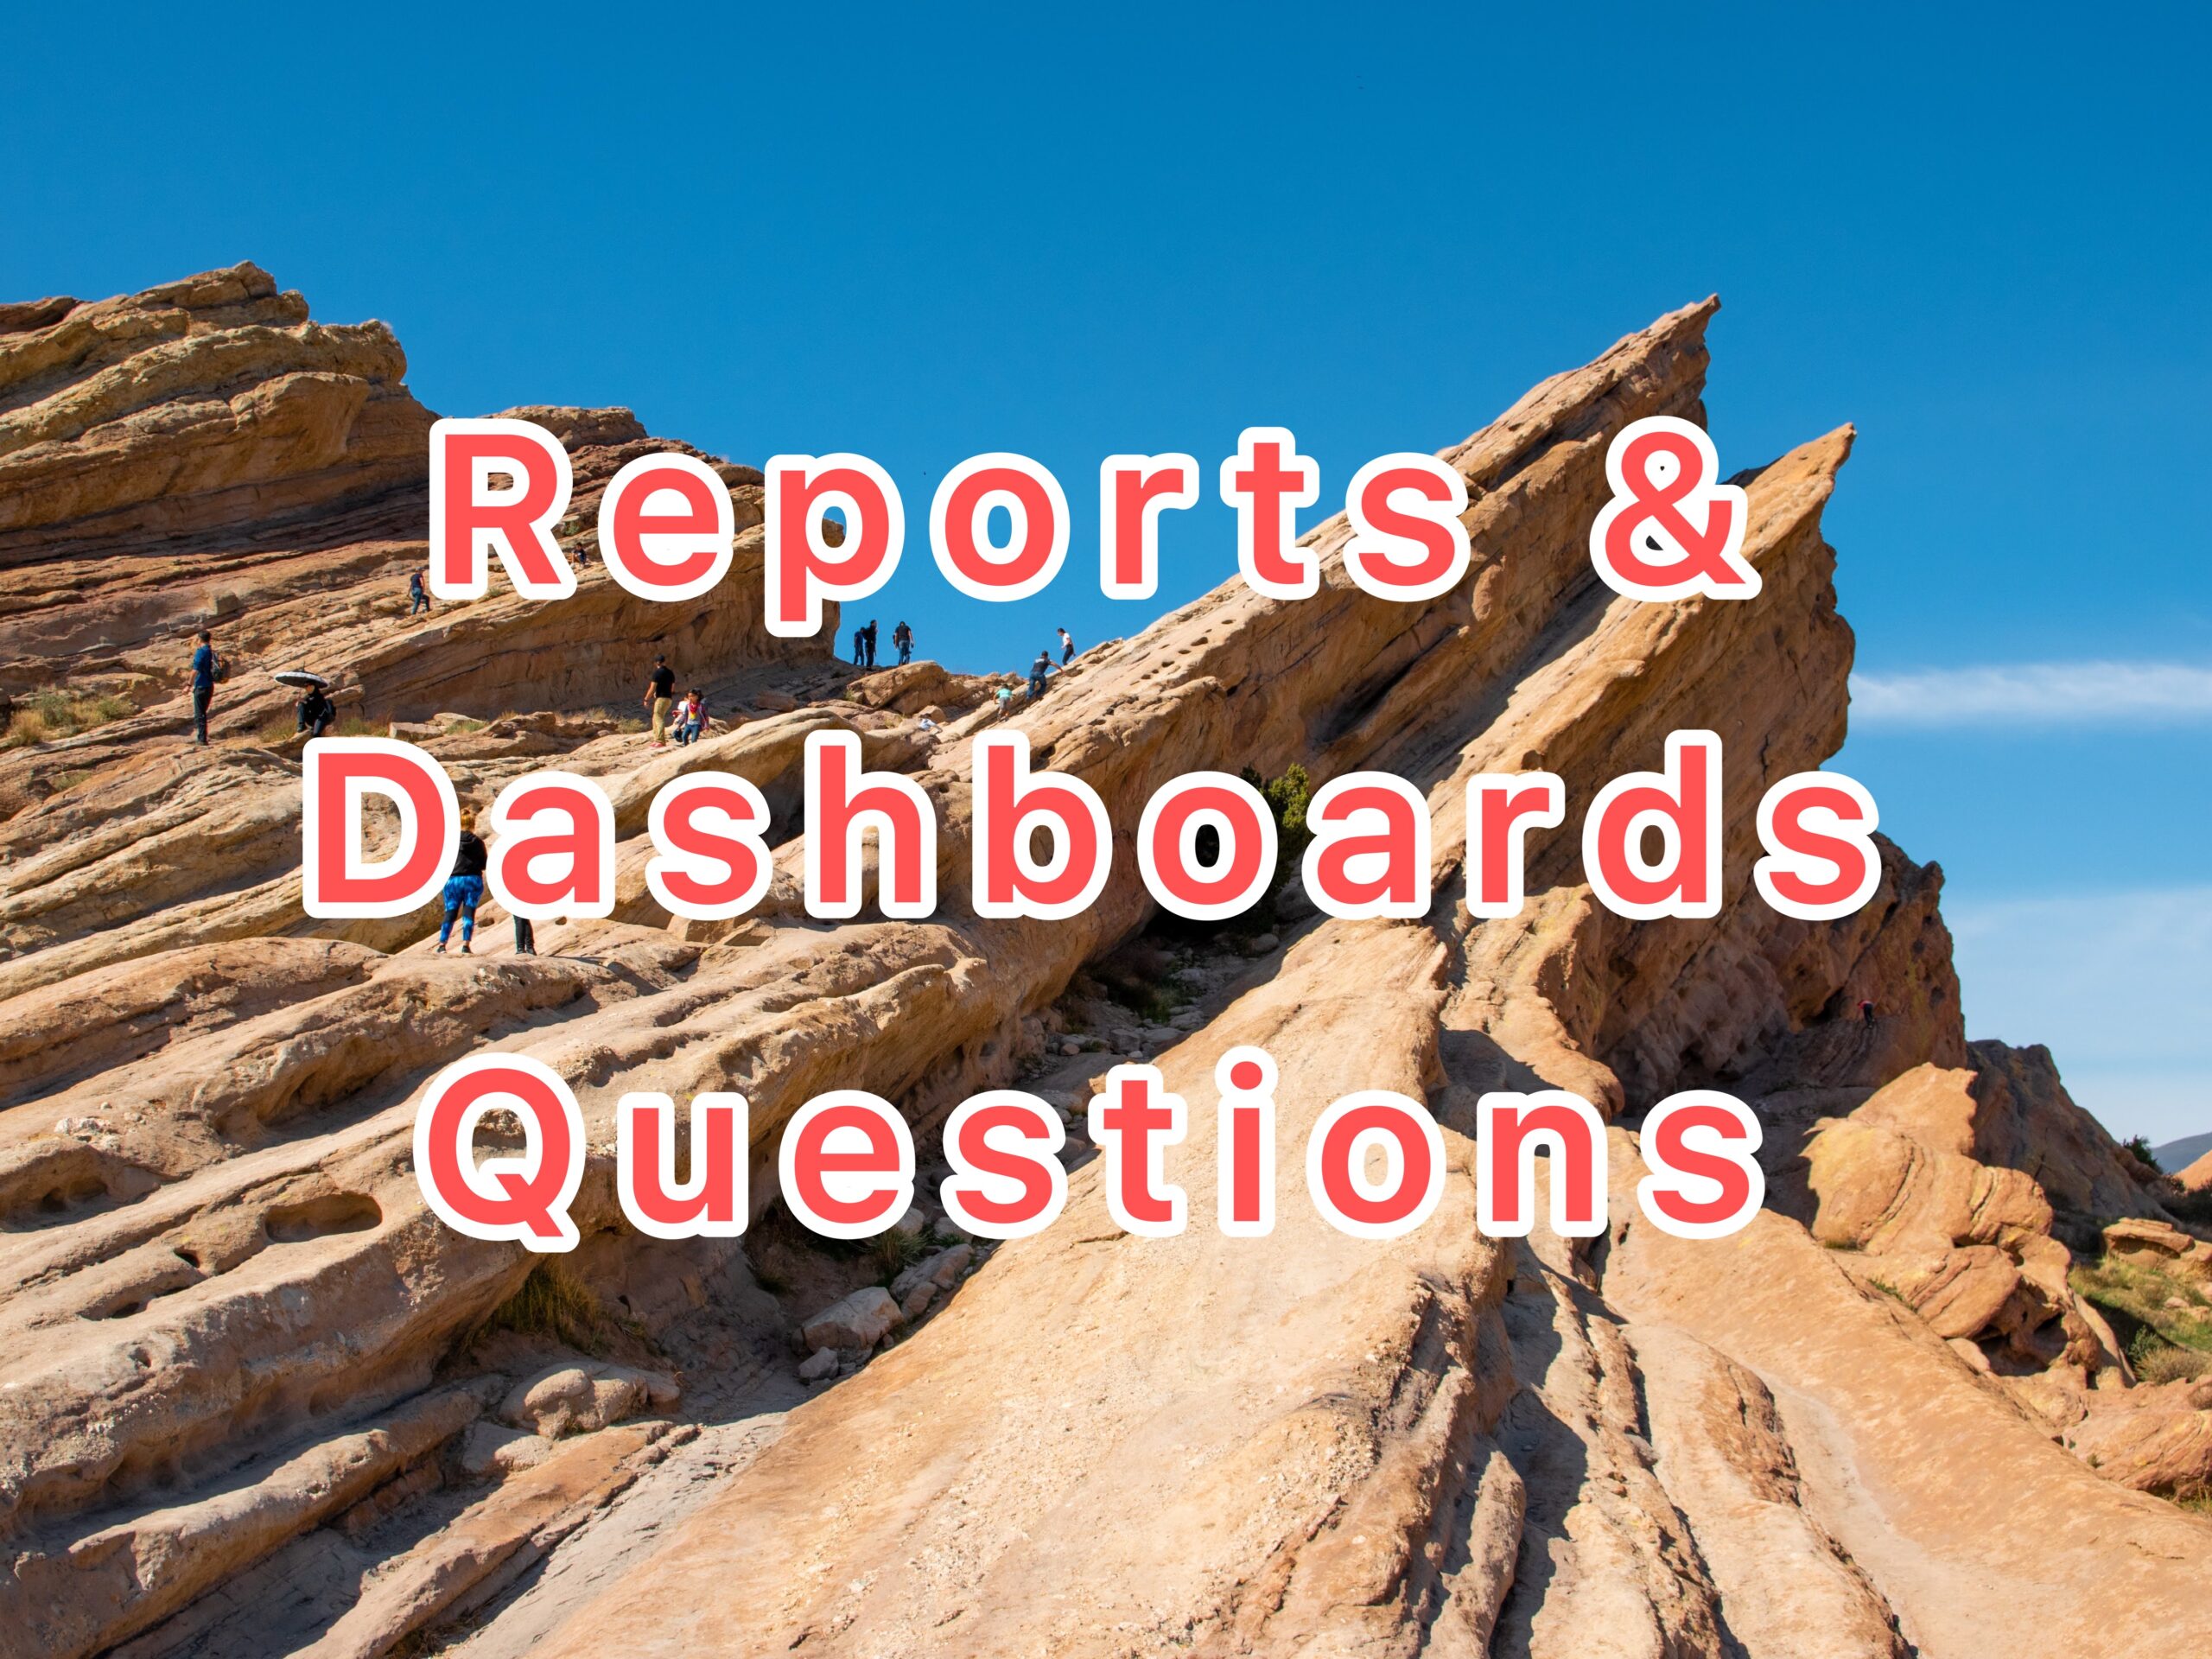 Salesforce Reports and Dashboards Interview Questions